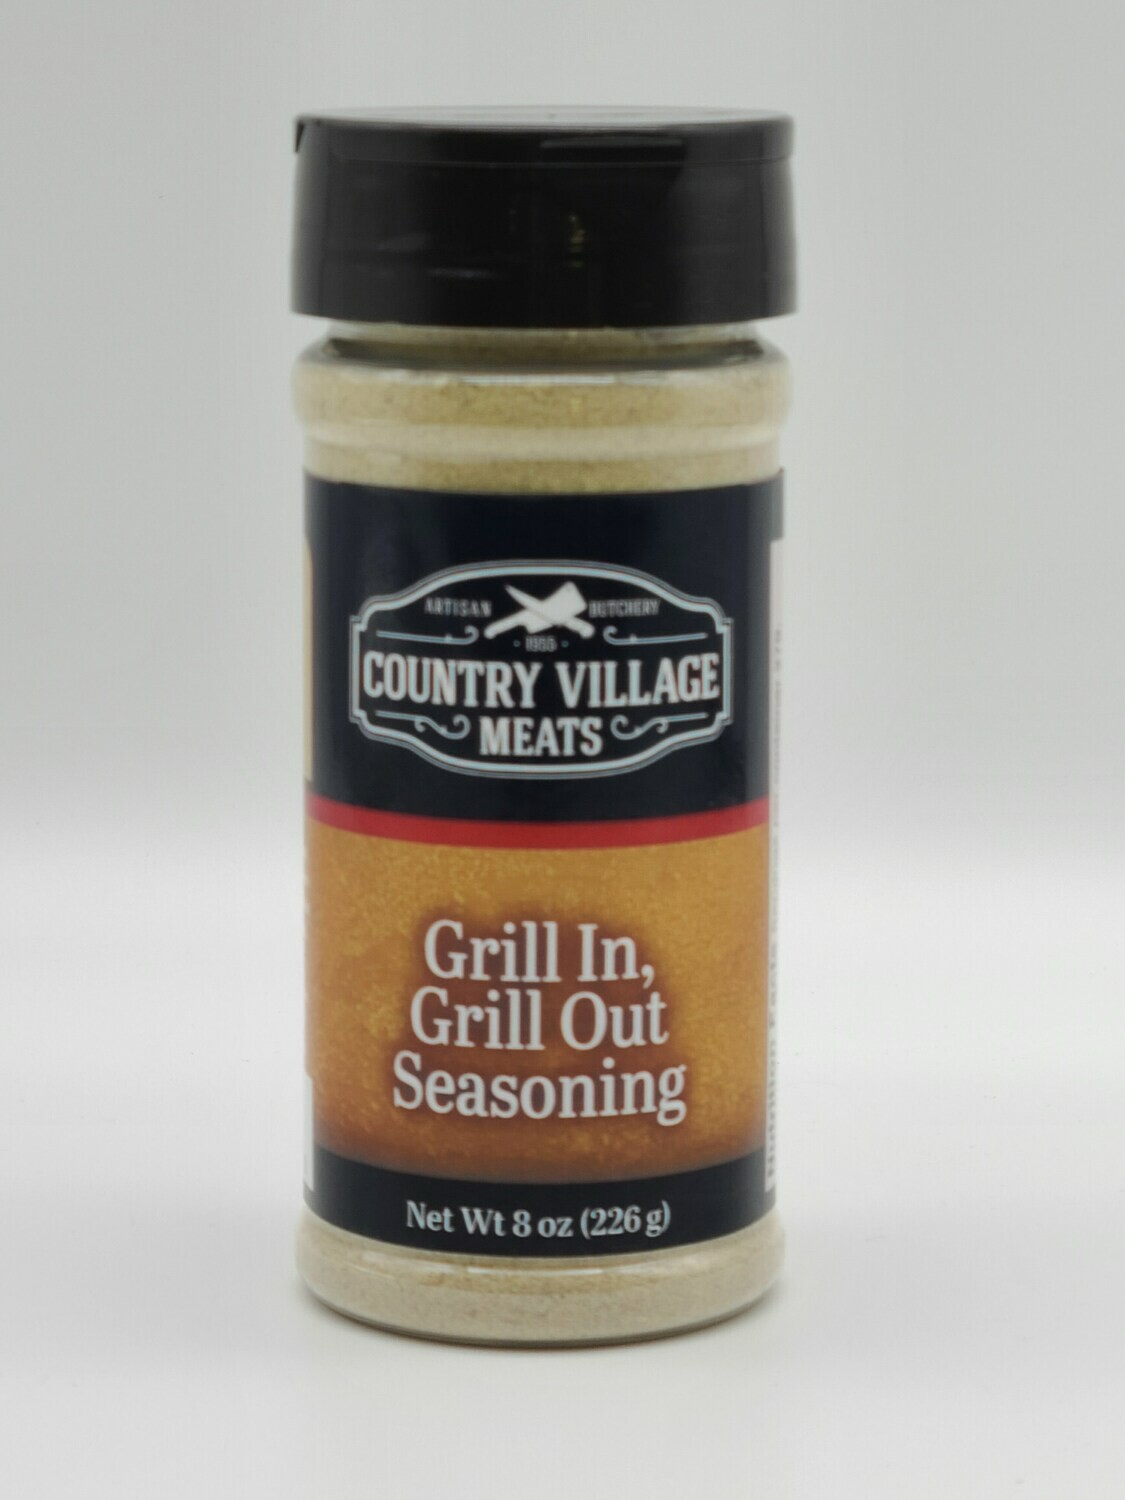 Country Village Meats - Grill In Grill Out 8 oz. Seasoning